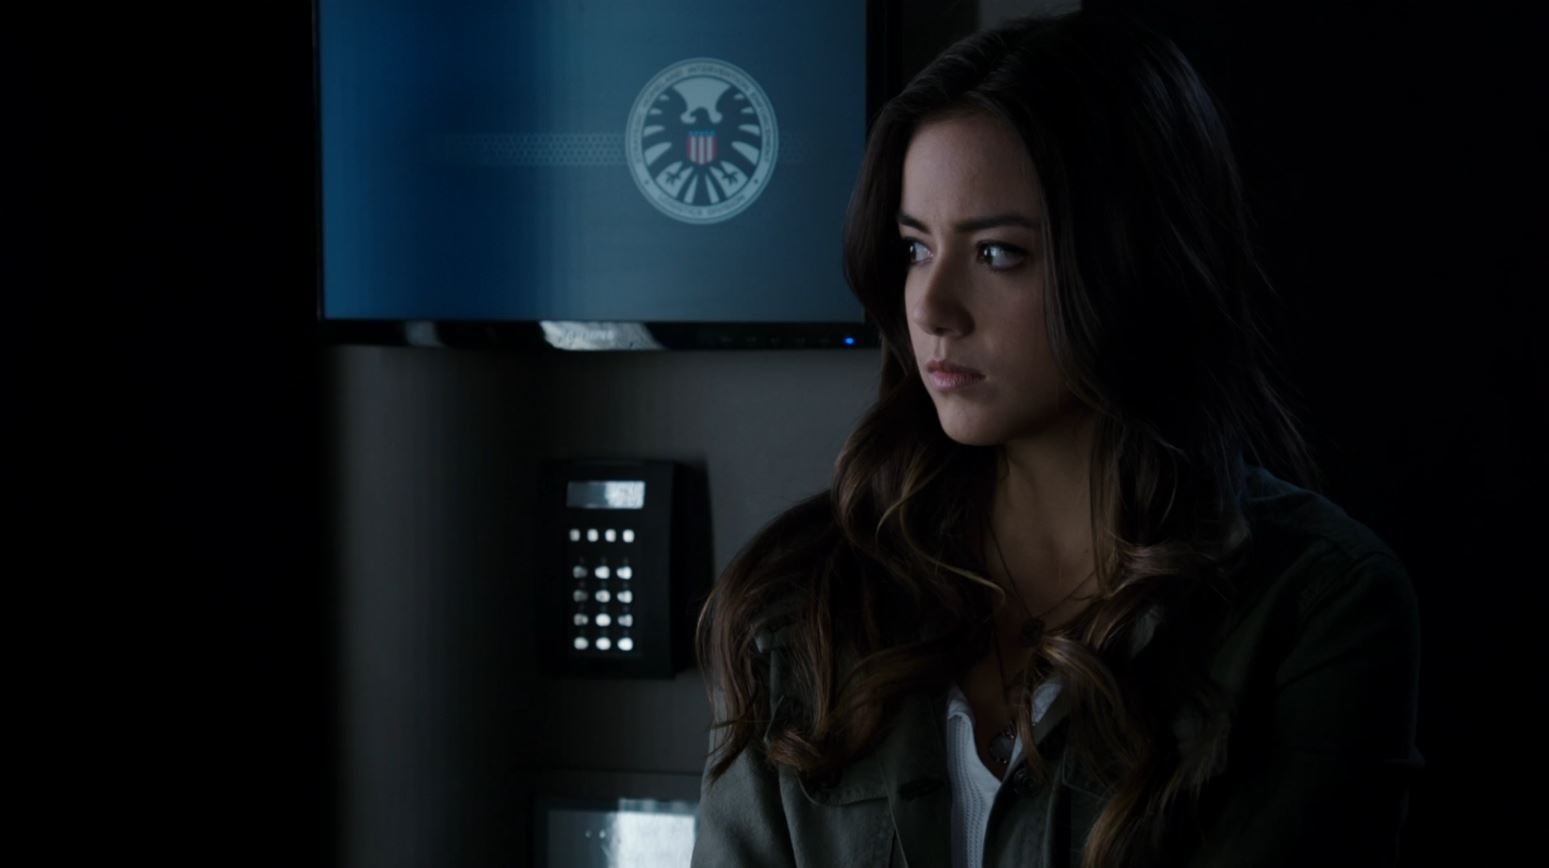 Watch Marvel's Agents of SHIELD Promo from the Oscars